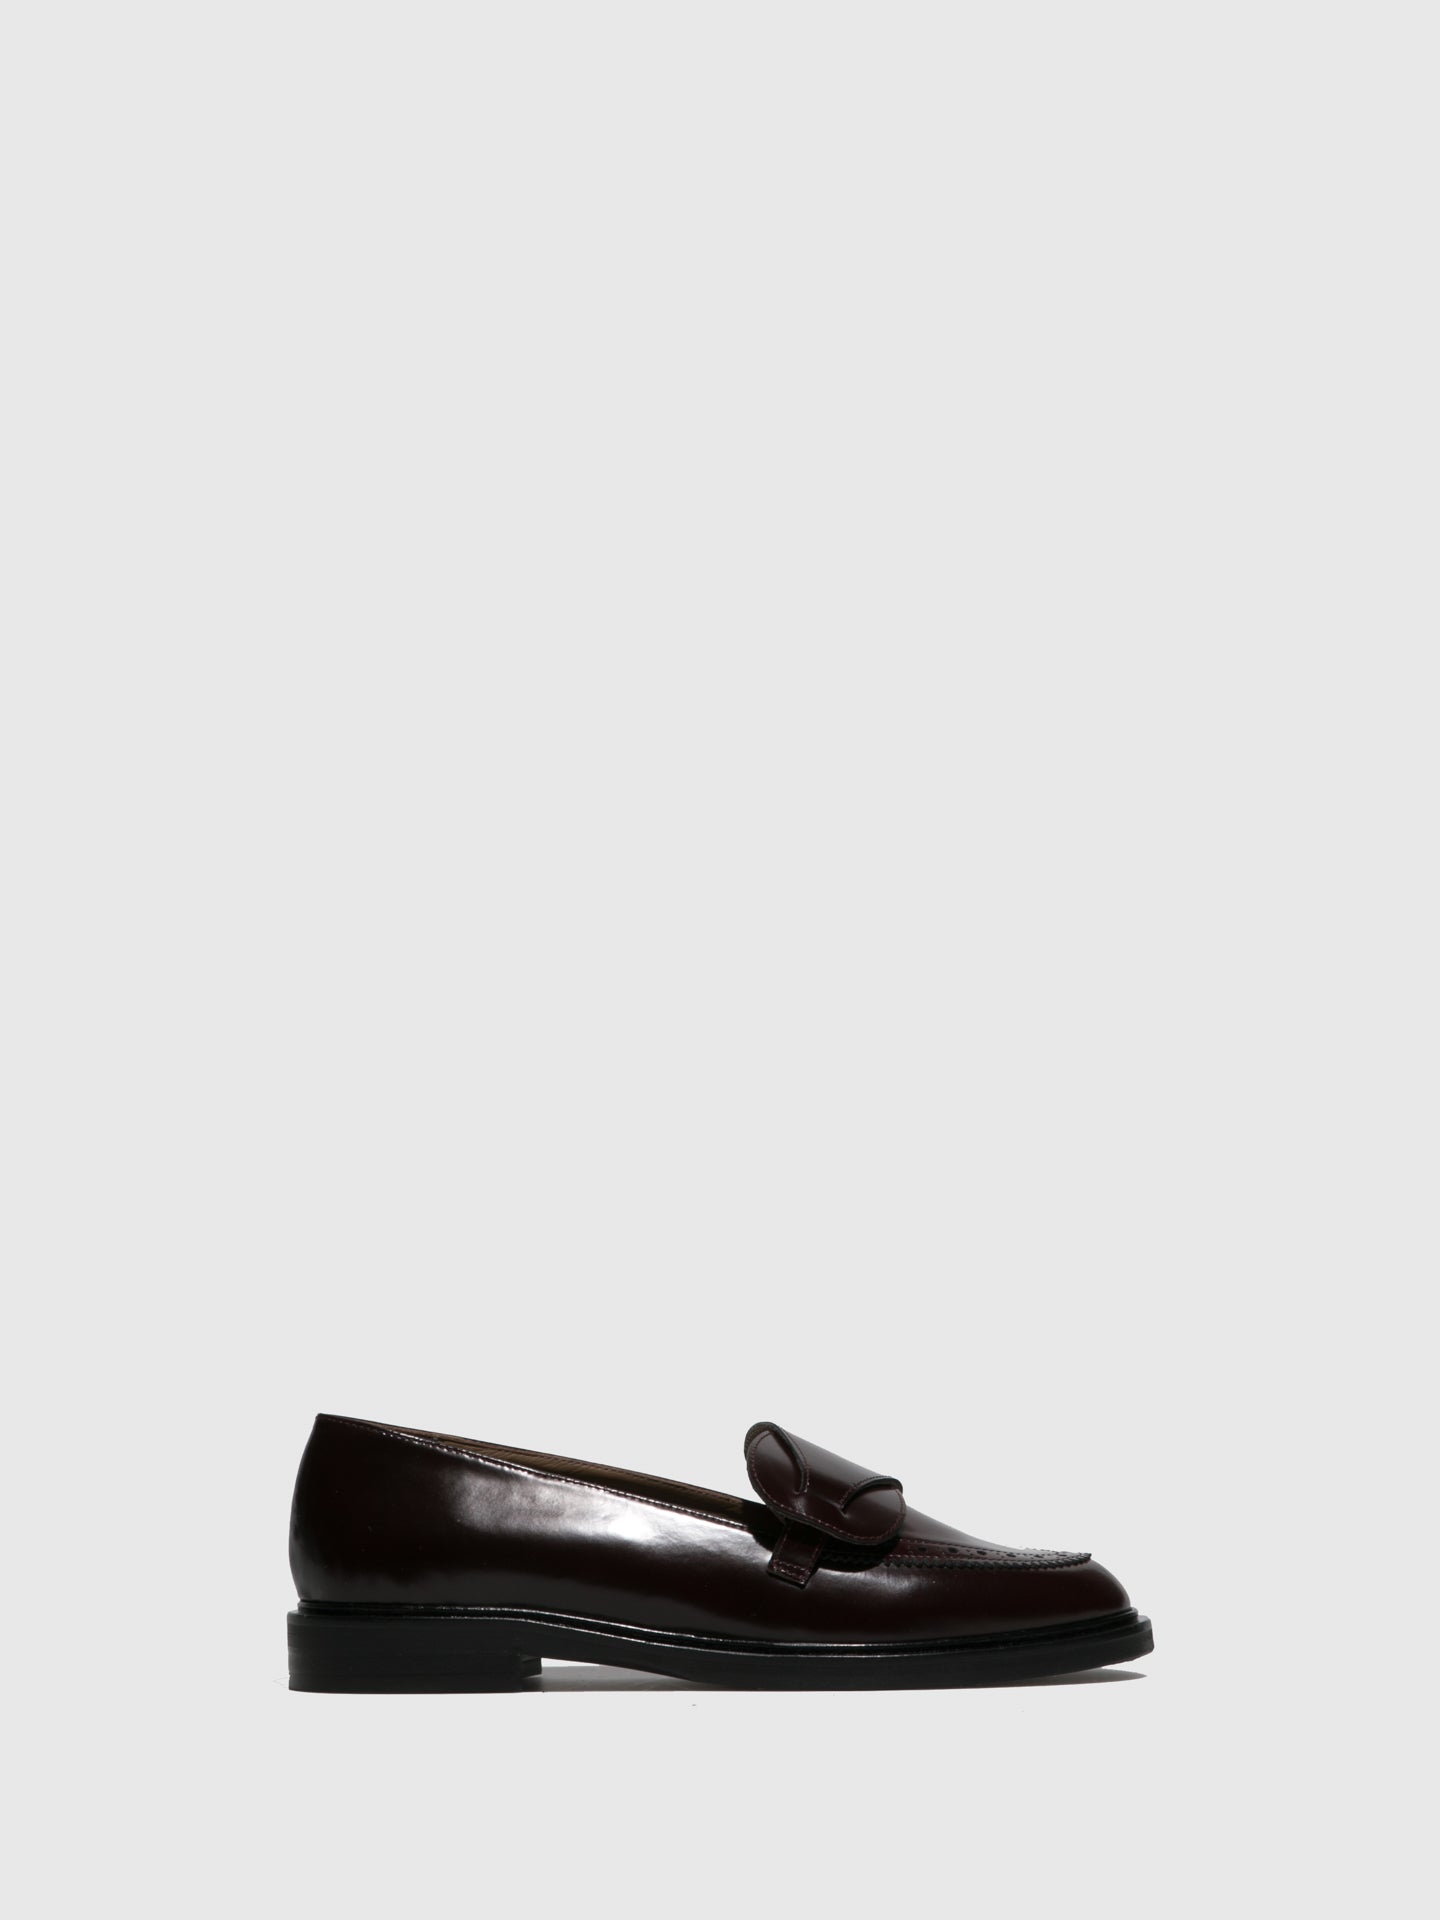 JJ Heitor DarkRed Loafers Shoes